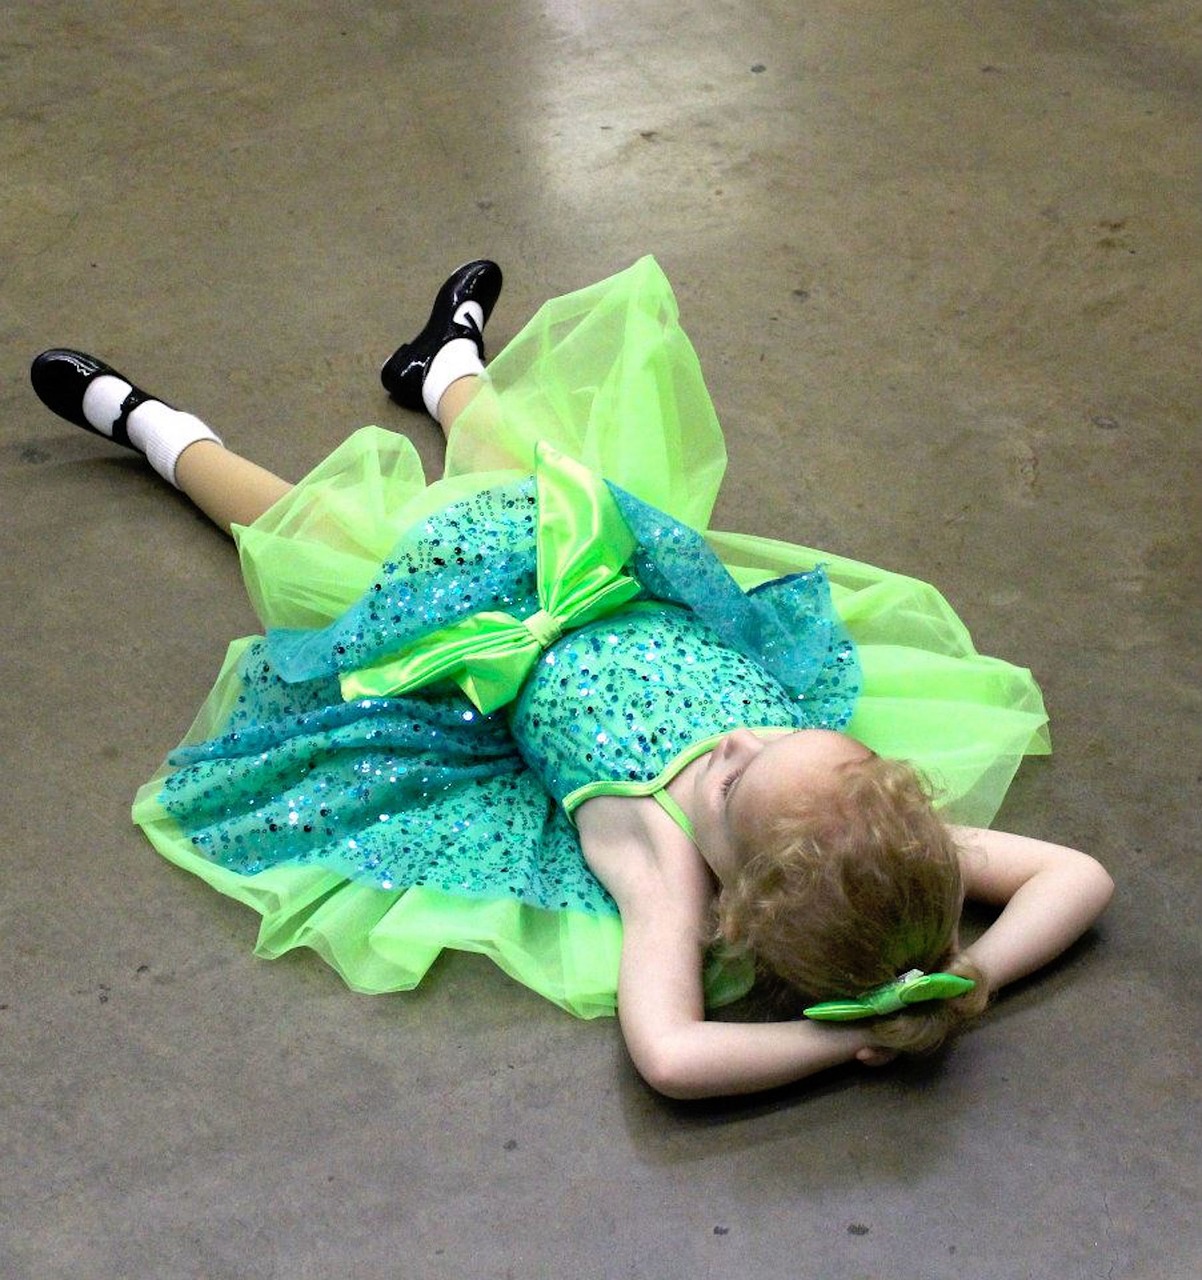 dance recital worn out free photo